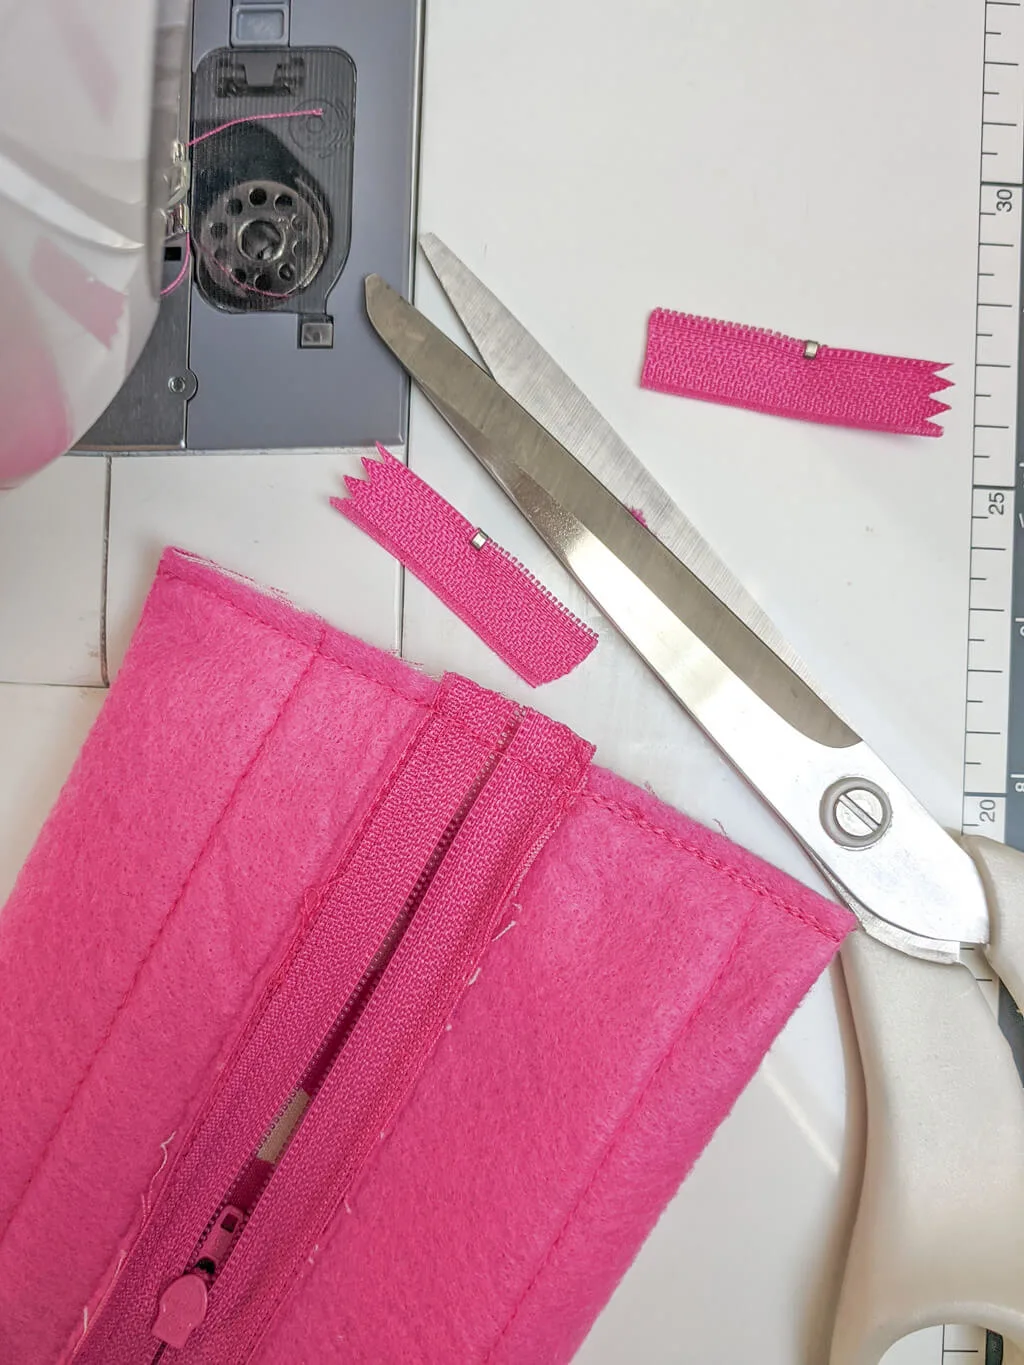 Trimming a long zipper with scissors